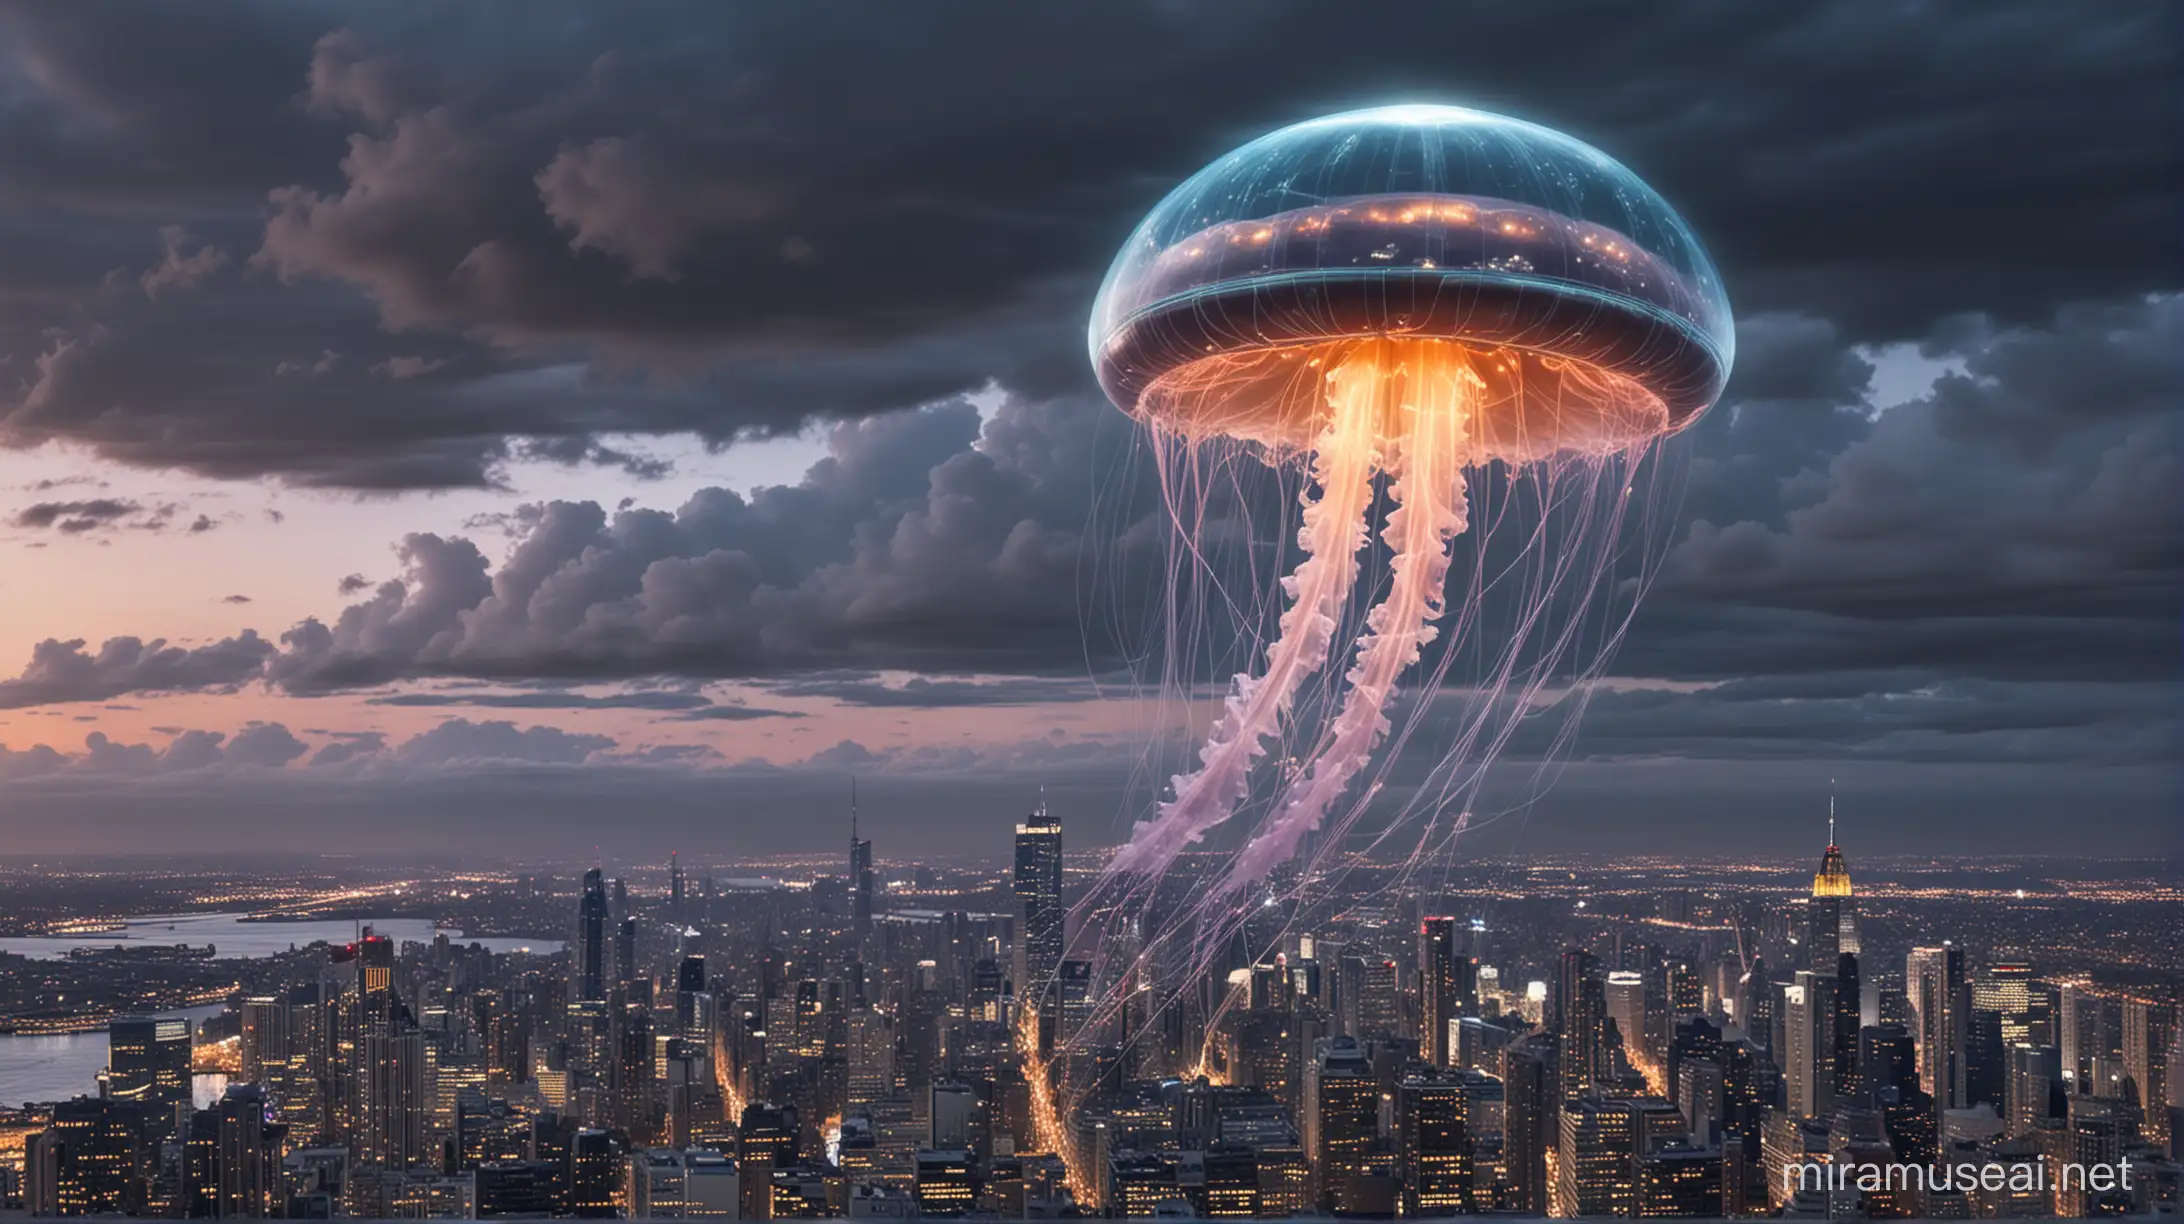 Cityscape Jellyfish UFO Urban Skyline with Ethereal Creature